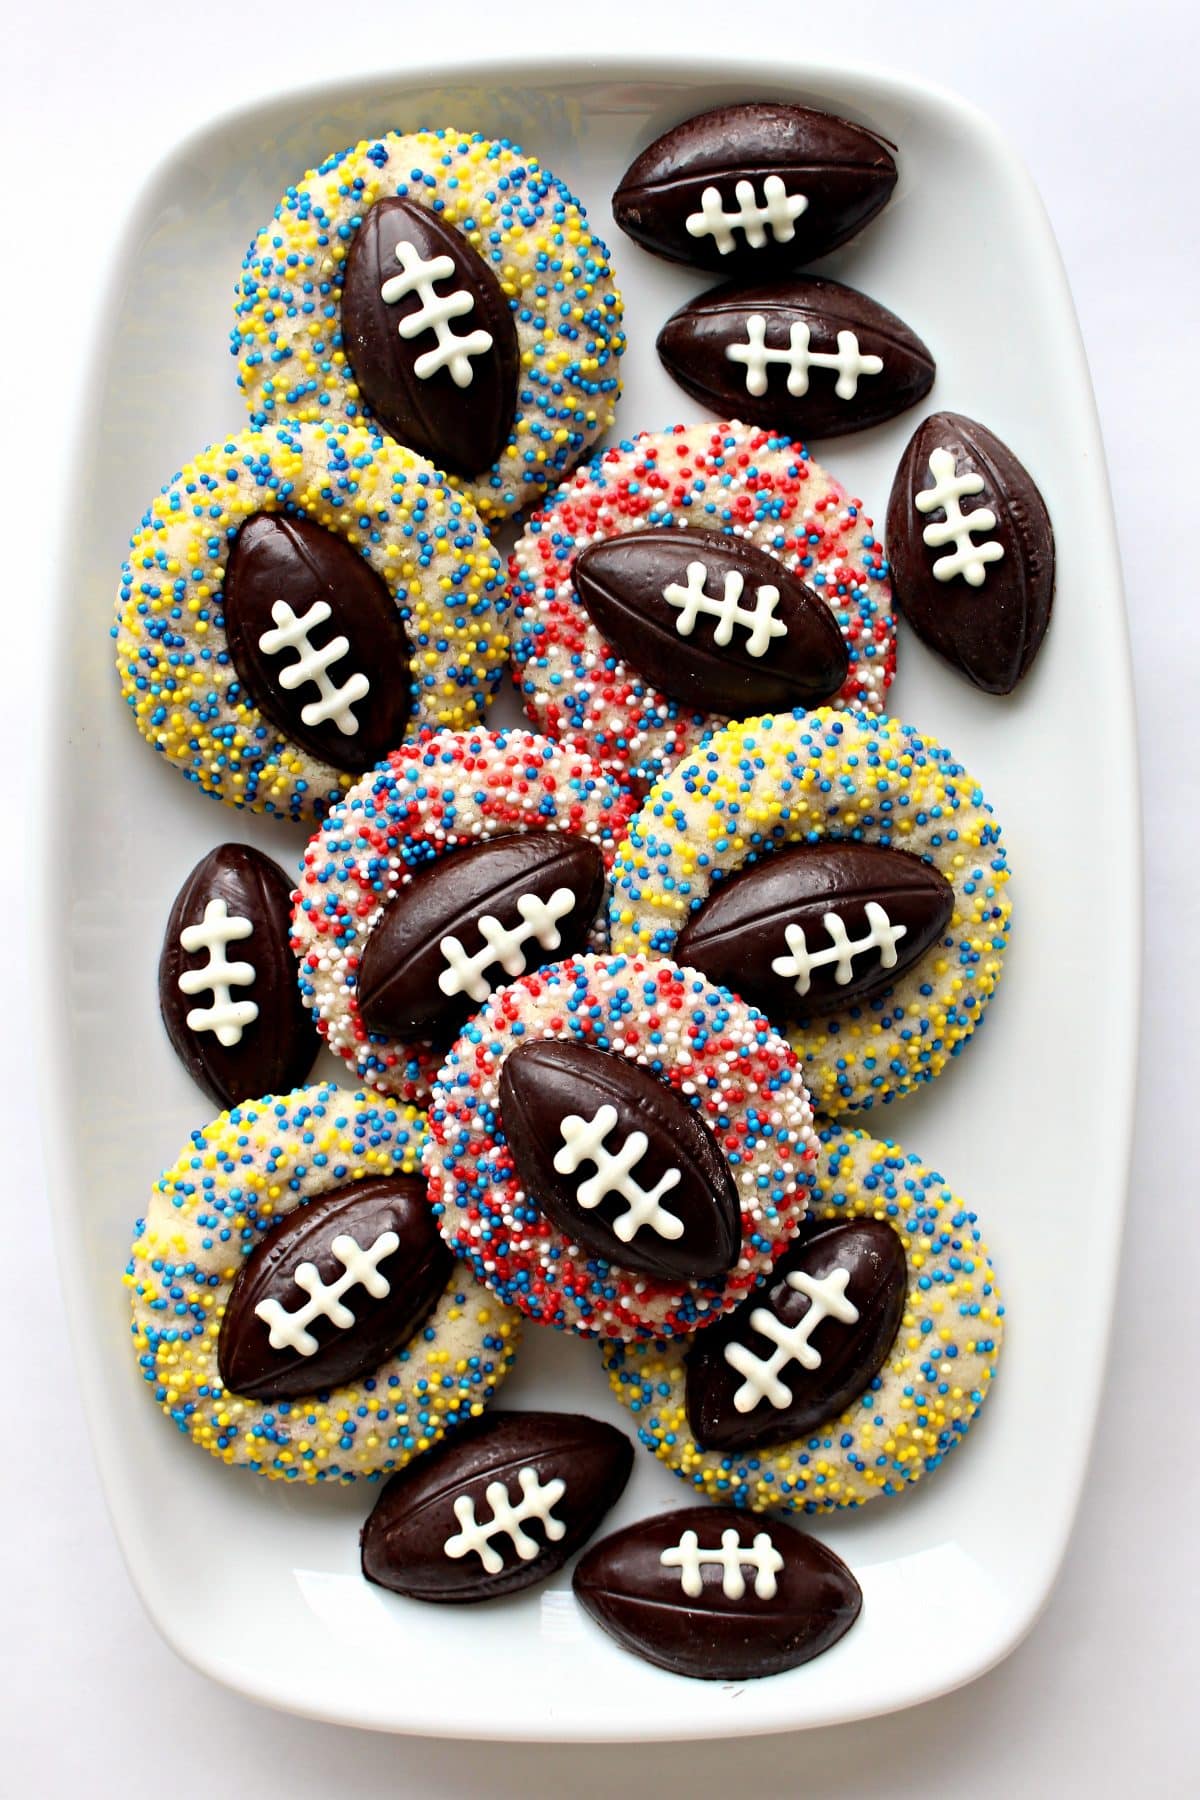 Thumbprint cookies with football chocolate in the middle.